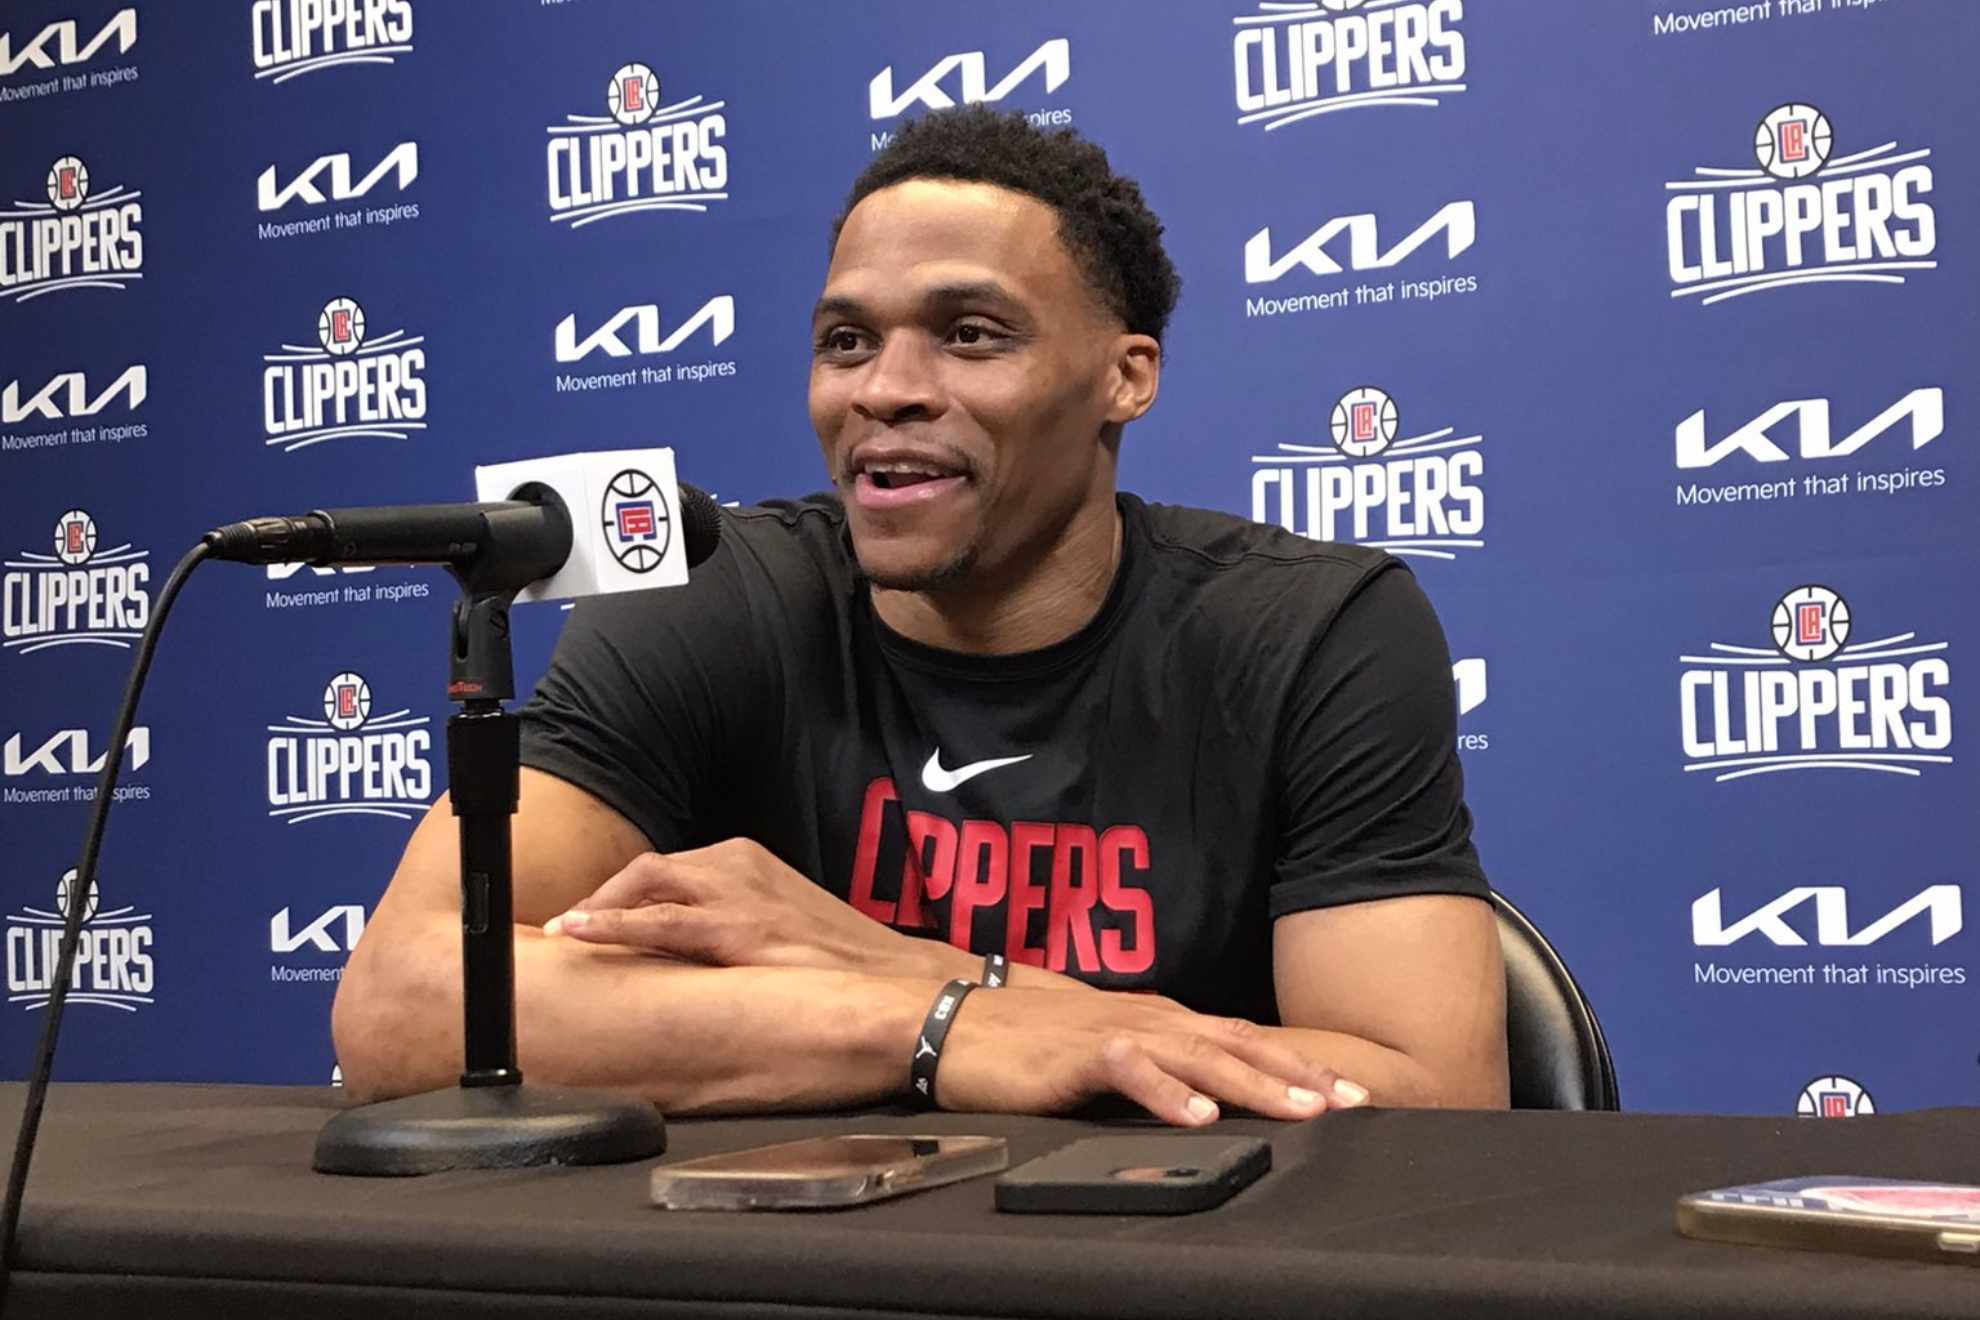 Russell Westbrook speaks to media after being presented as a new LA Clippers player.